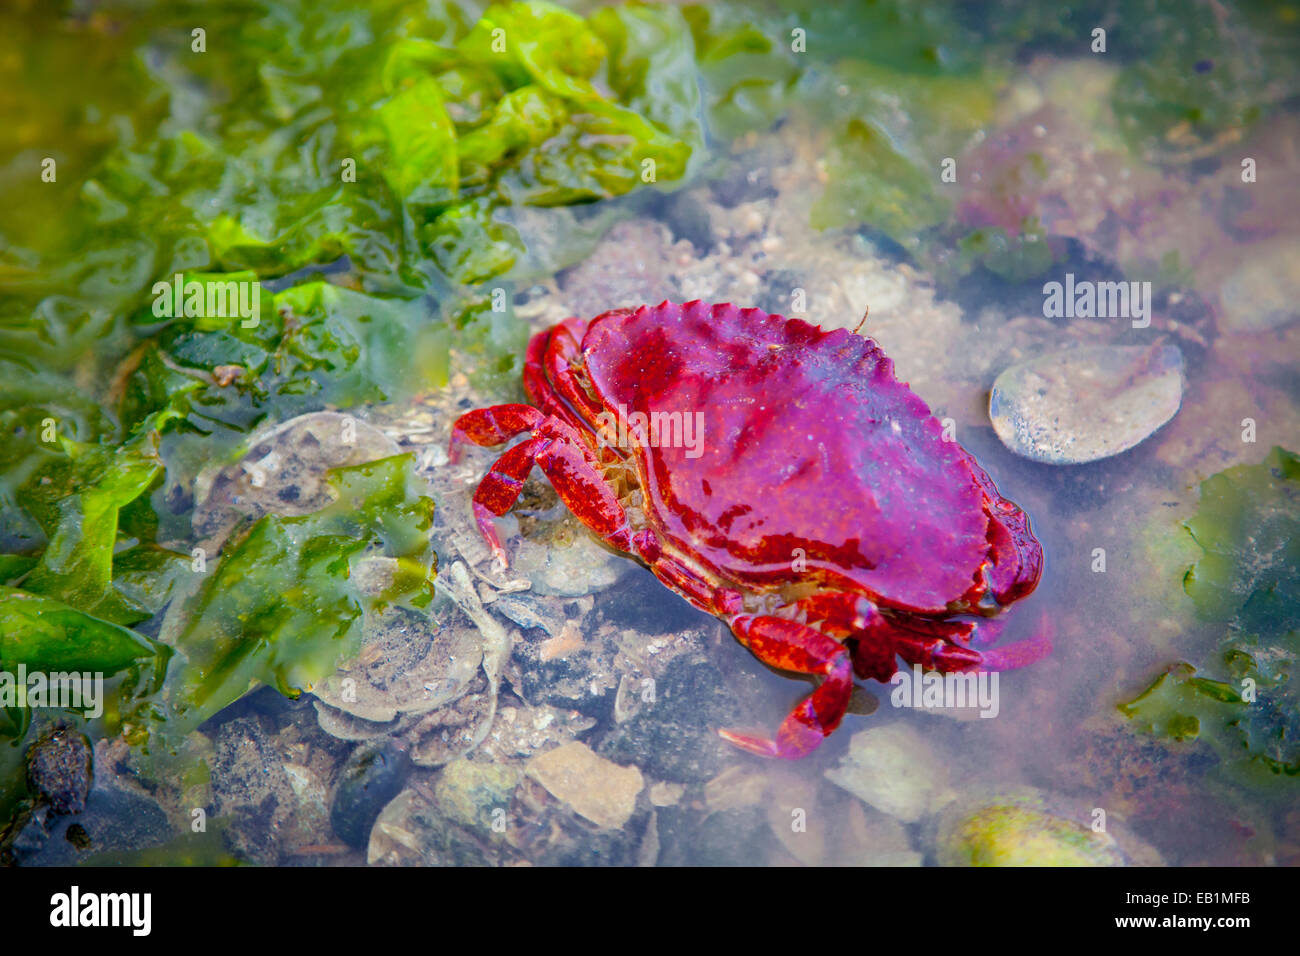 Crab and seaweed in a rock pool at low tide in Sechelt,British Columbia, Canada Stock Photo